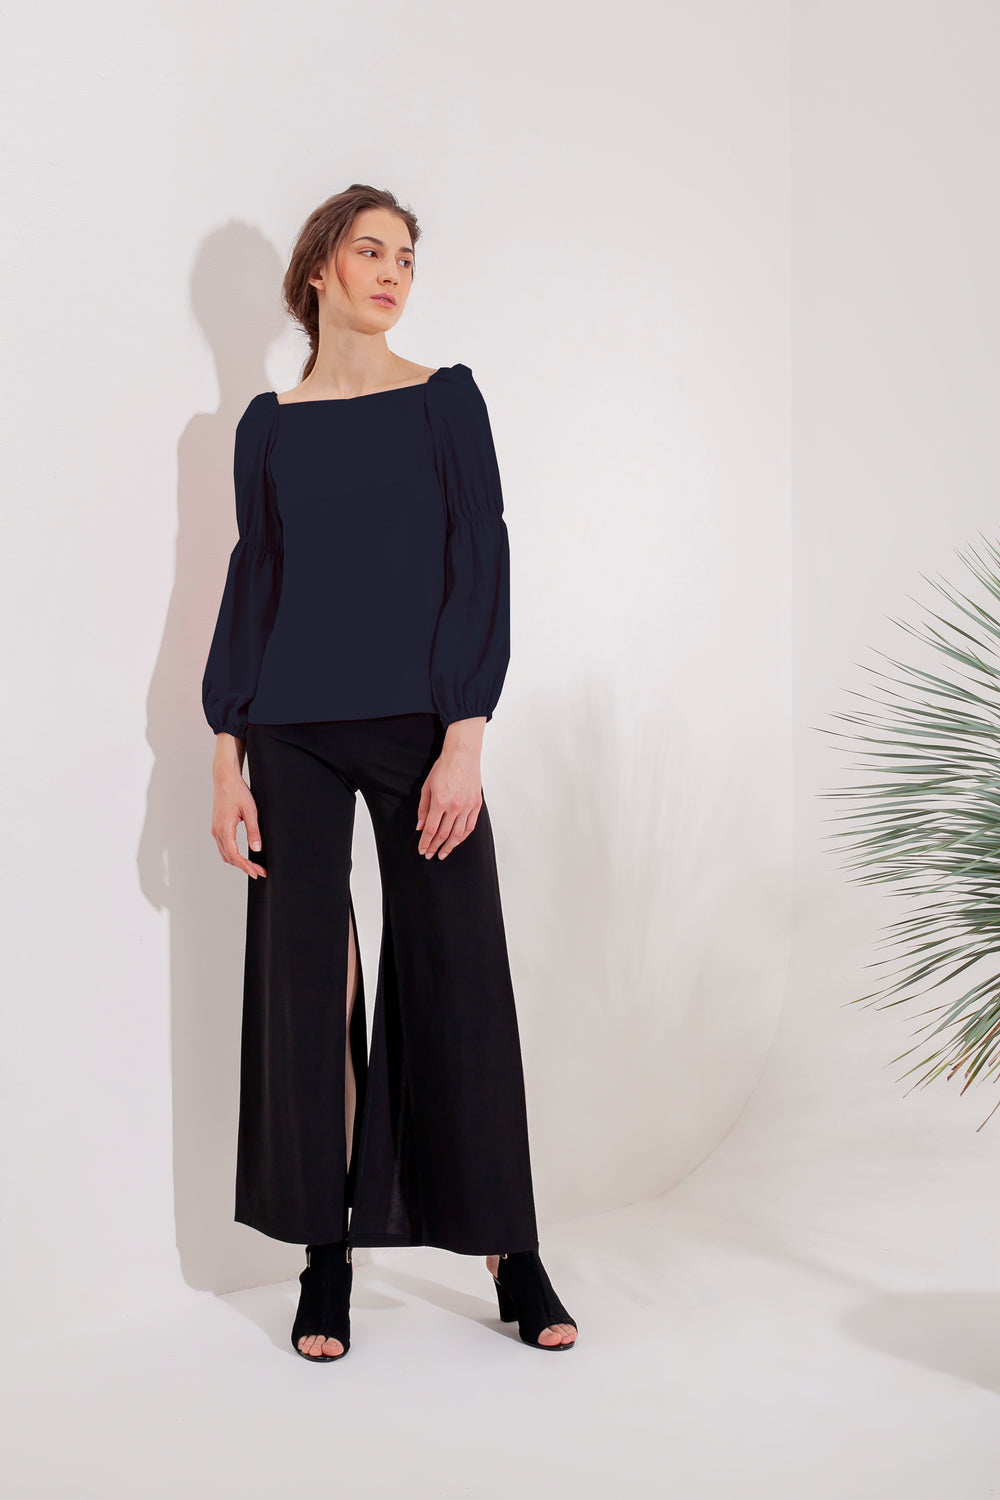 Domani Idalia Prussian Top Modest Loose Fitting Long Sleeve Navy Top for Women with Puff and Gathered Sleeves in Polyester and Cotton